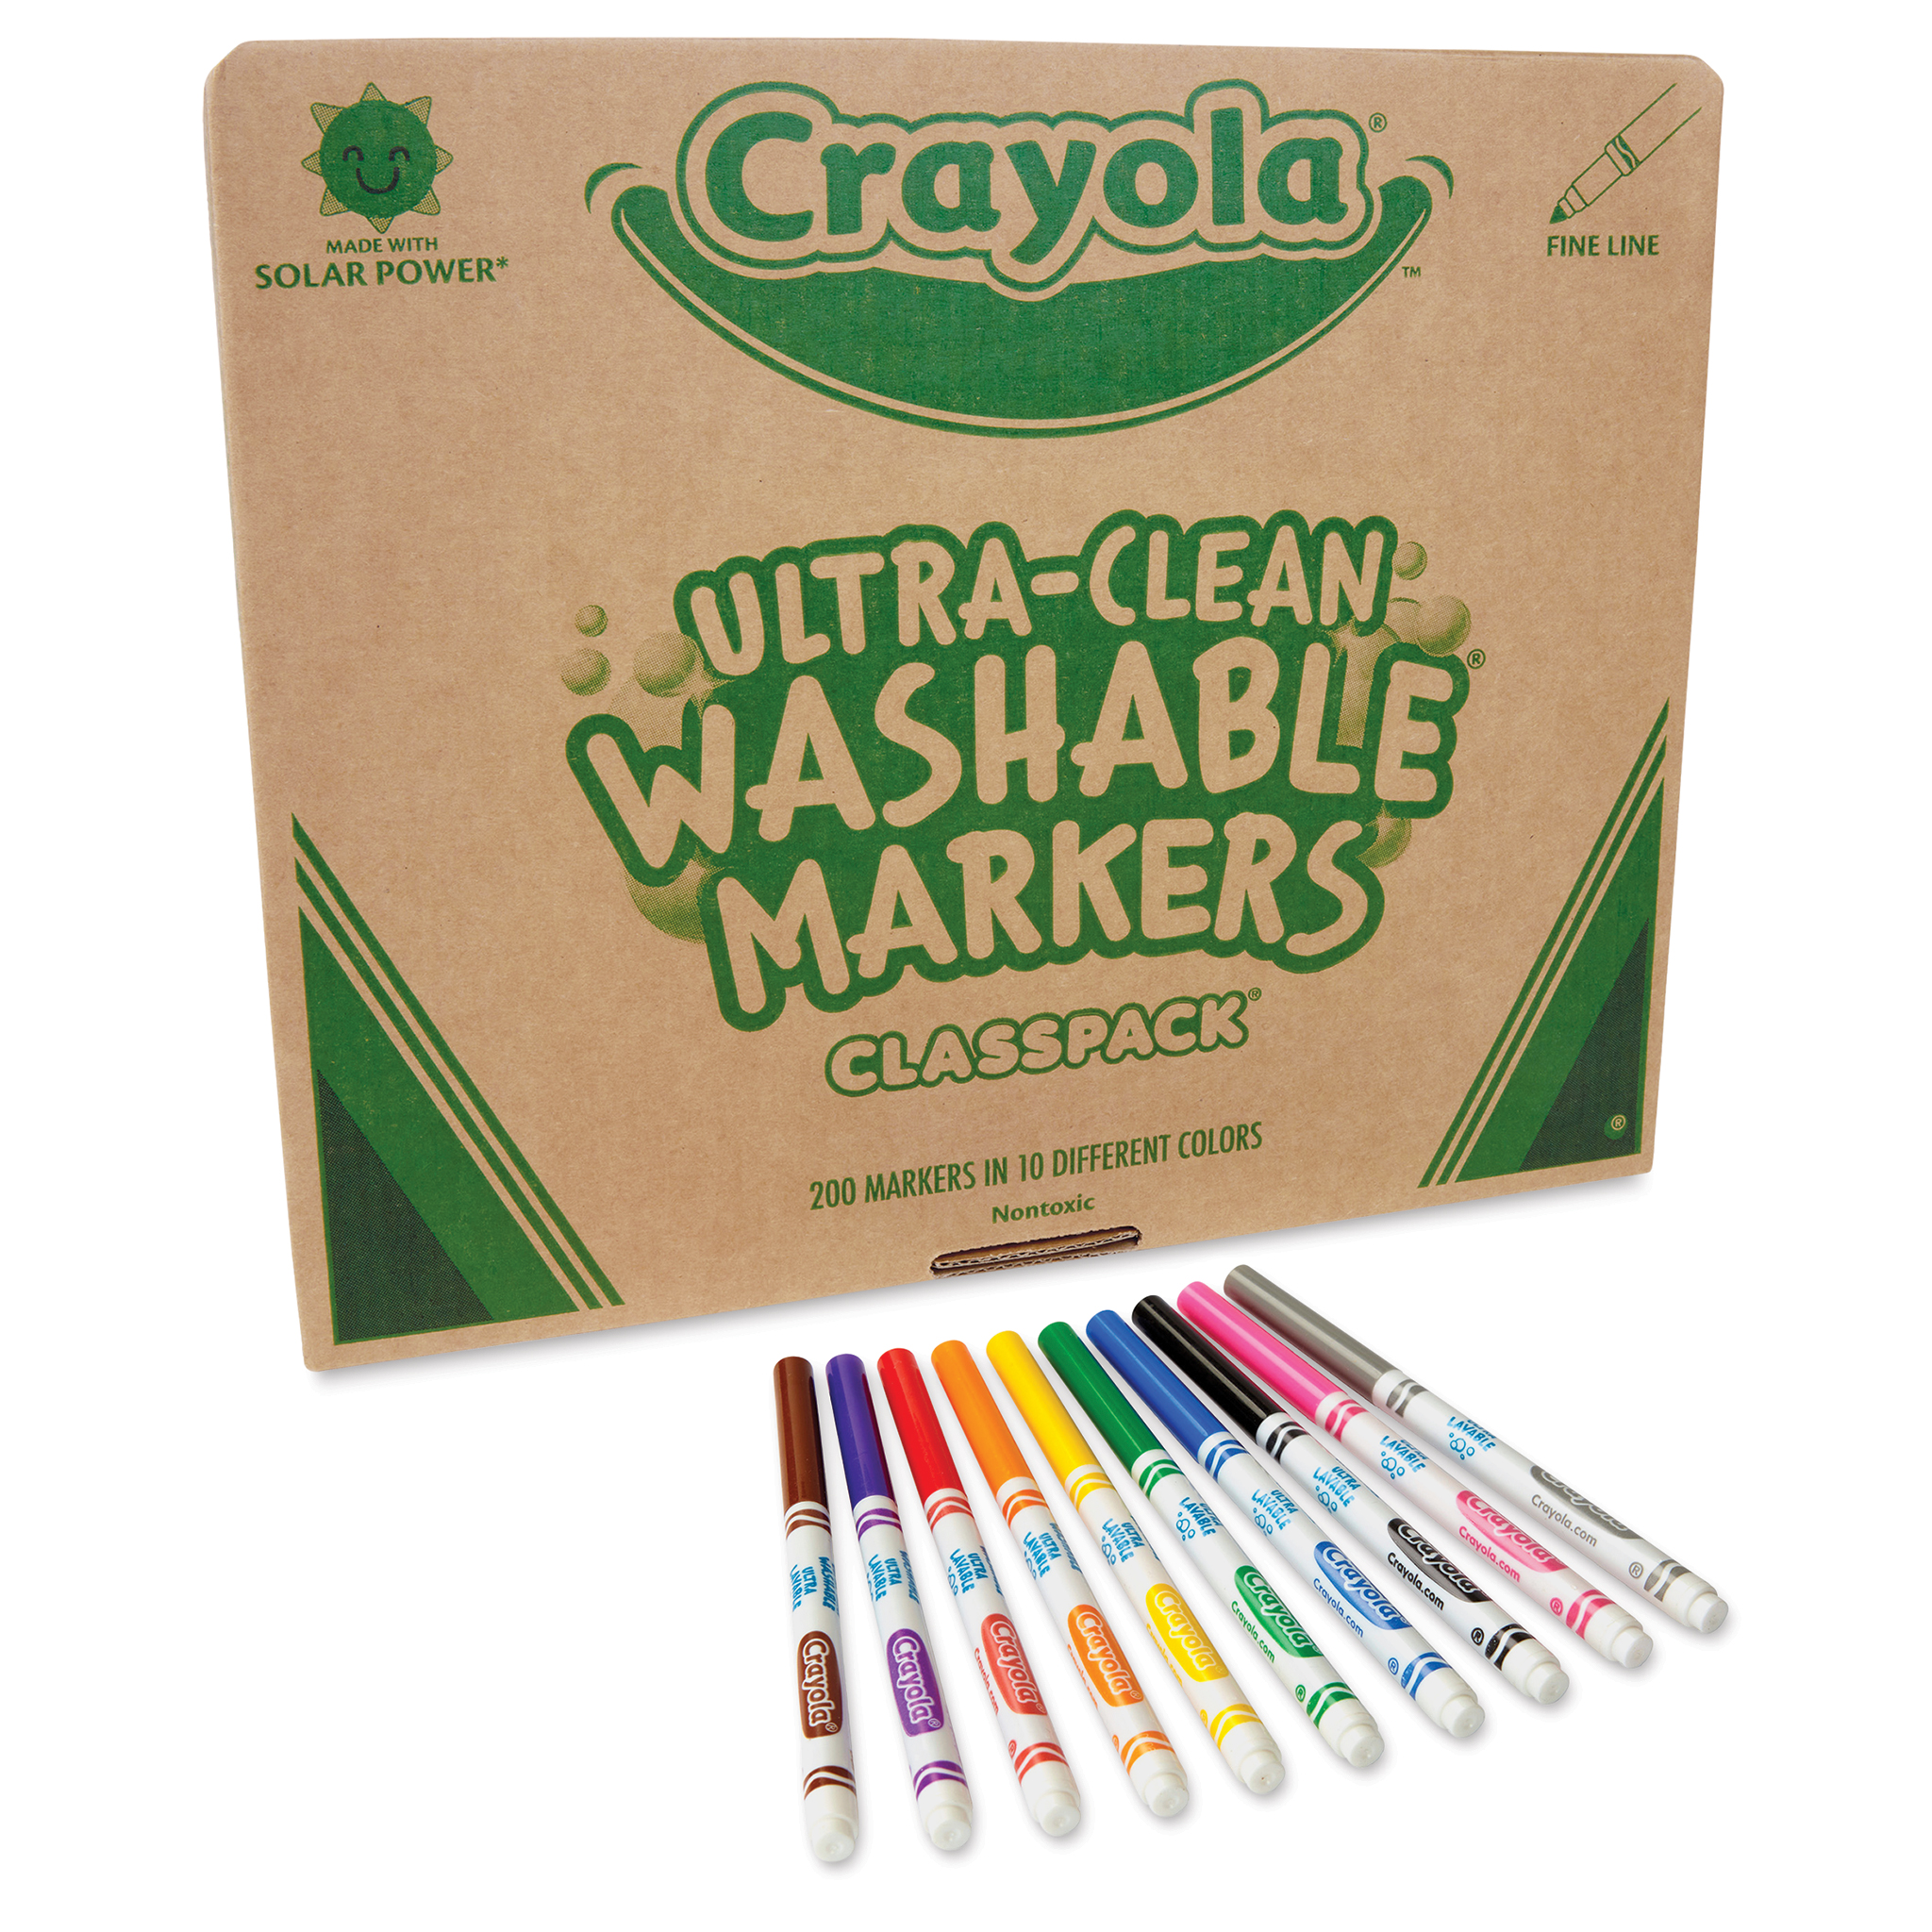 Crayola Ultra-Clean Washable Markers, Wedge Tip, 8 per Box, 6 Boxes